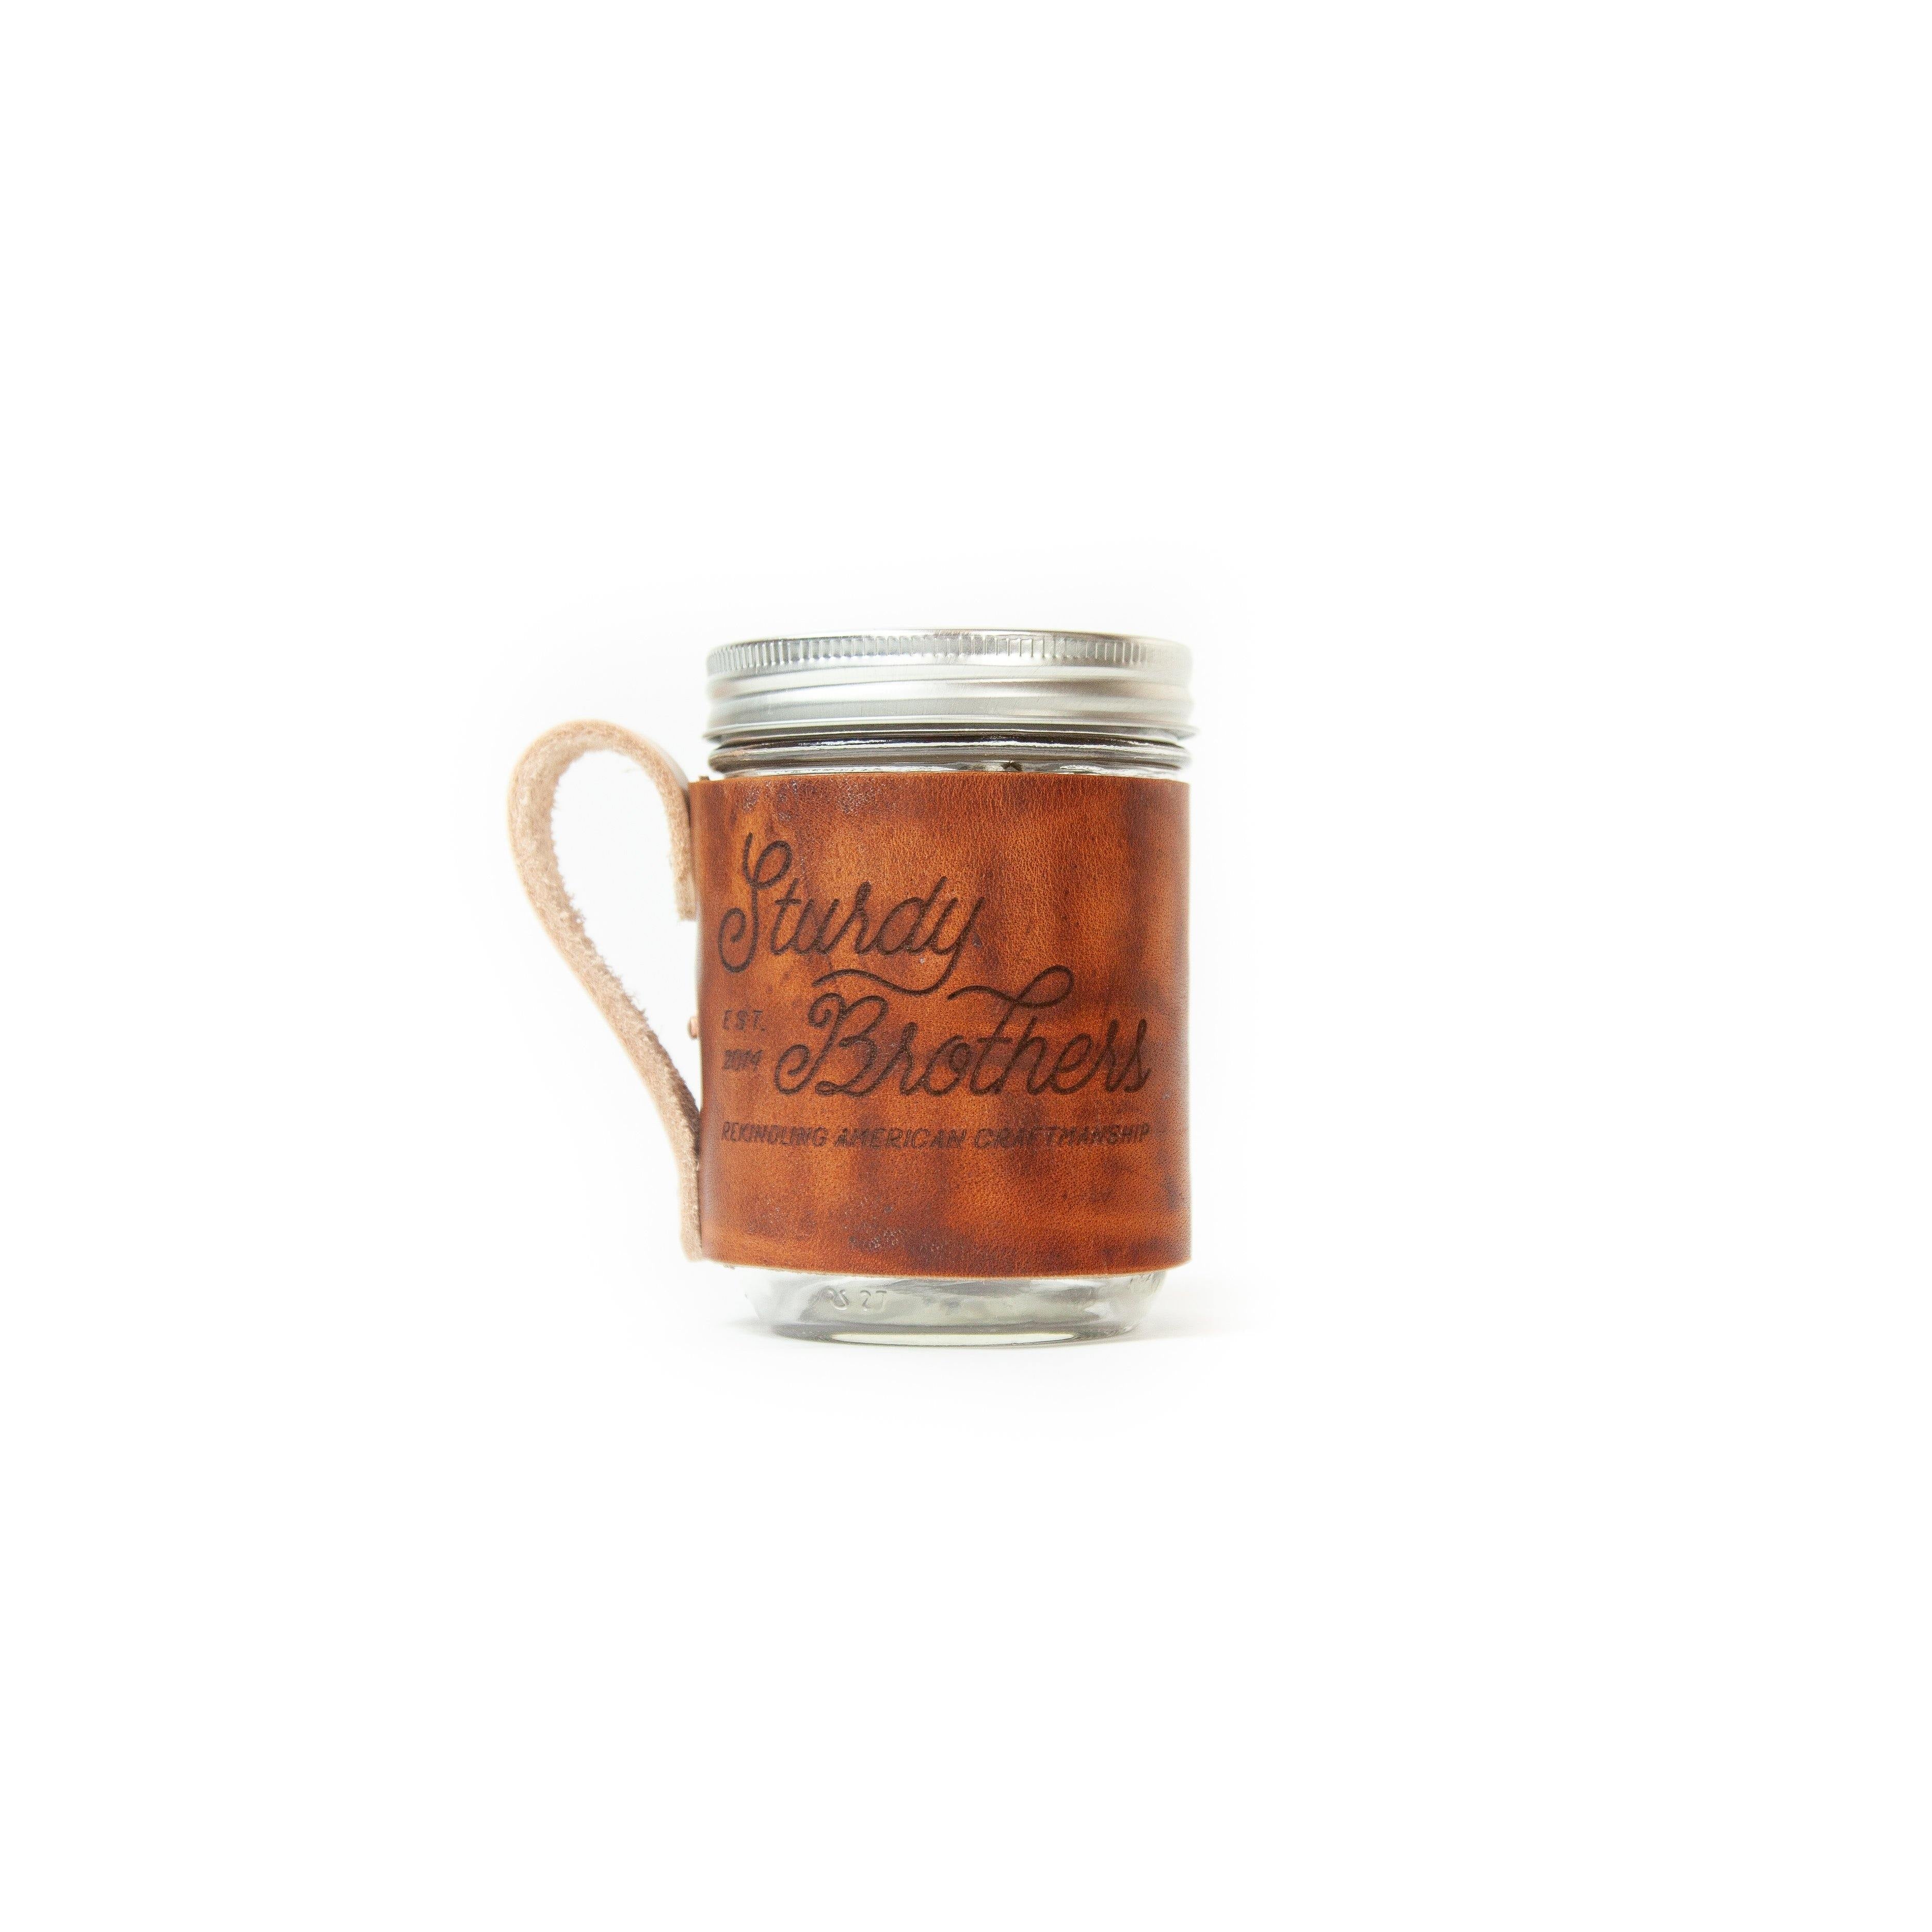 Down Home Specialty Coffee Mug - Sturdy Brothers